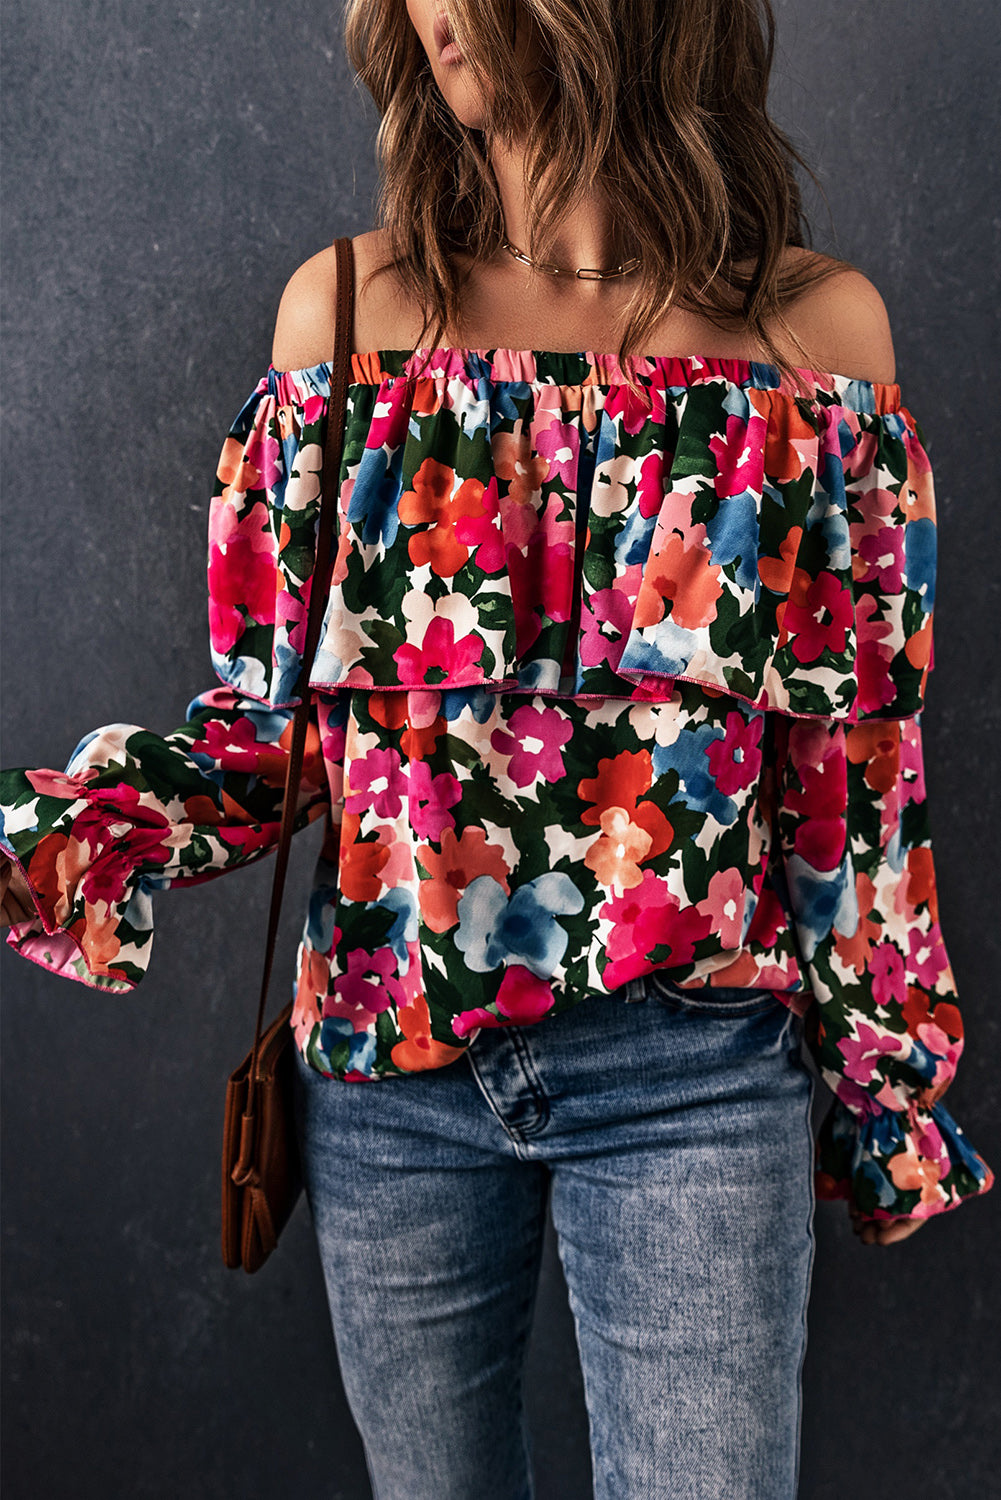 Floral Off-Shoulder Flounce Sleeve Layered Blouse - Online Only